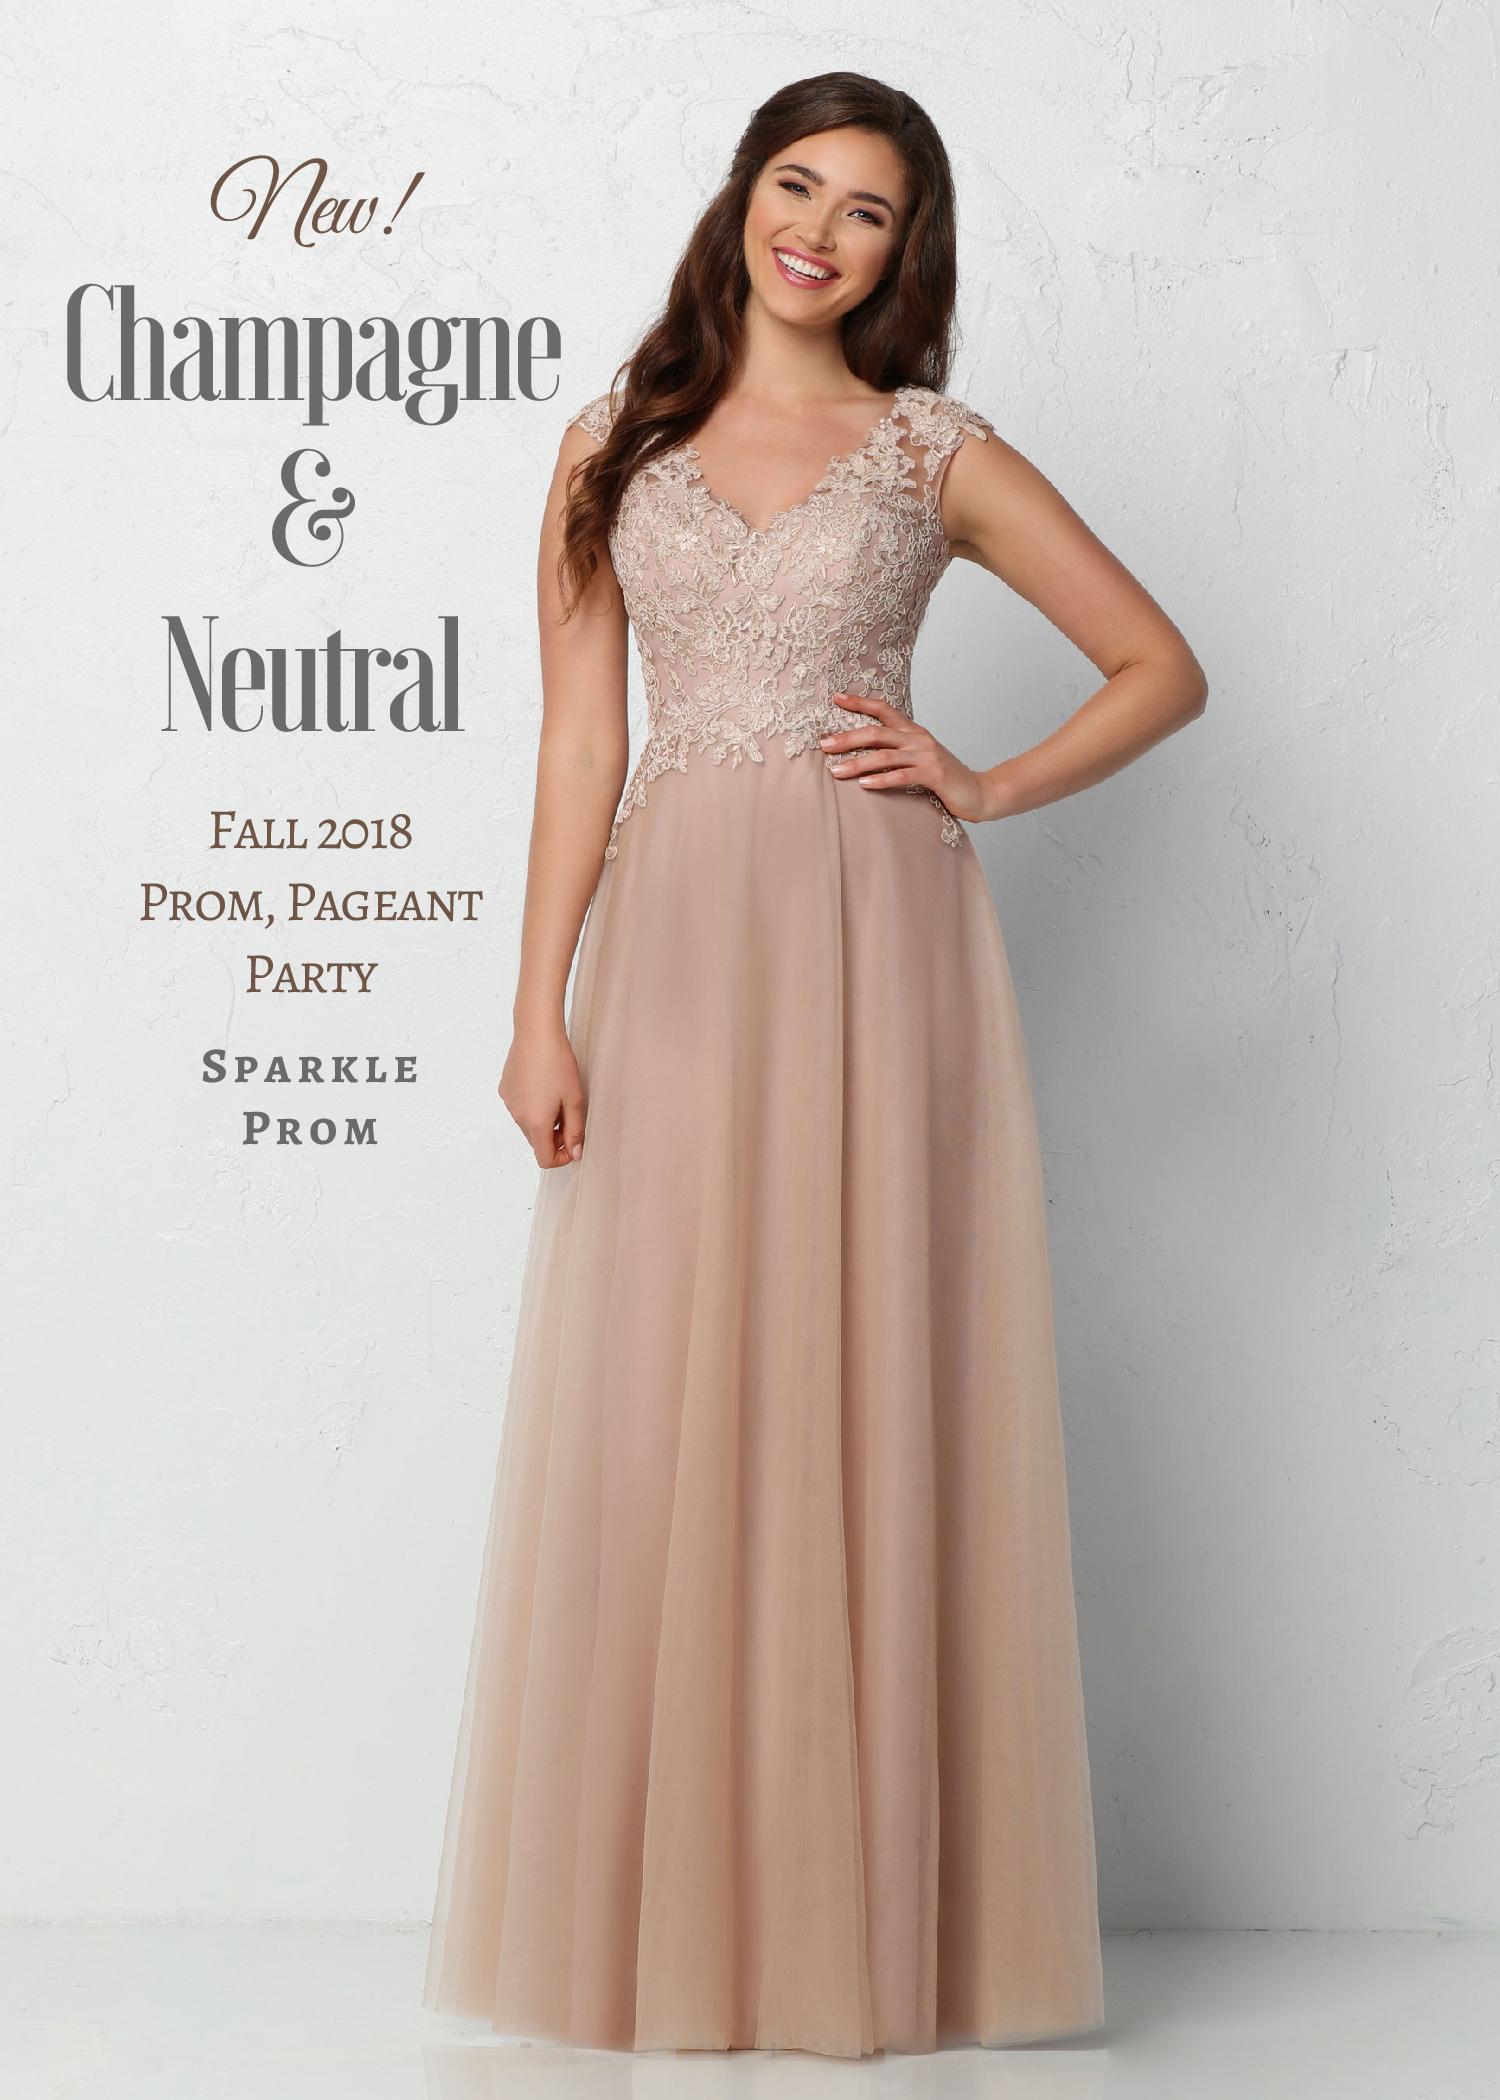 New! 2018 Long Champagne & Neutral Prom/Party Dresses – Sparkle Prom Blog